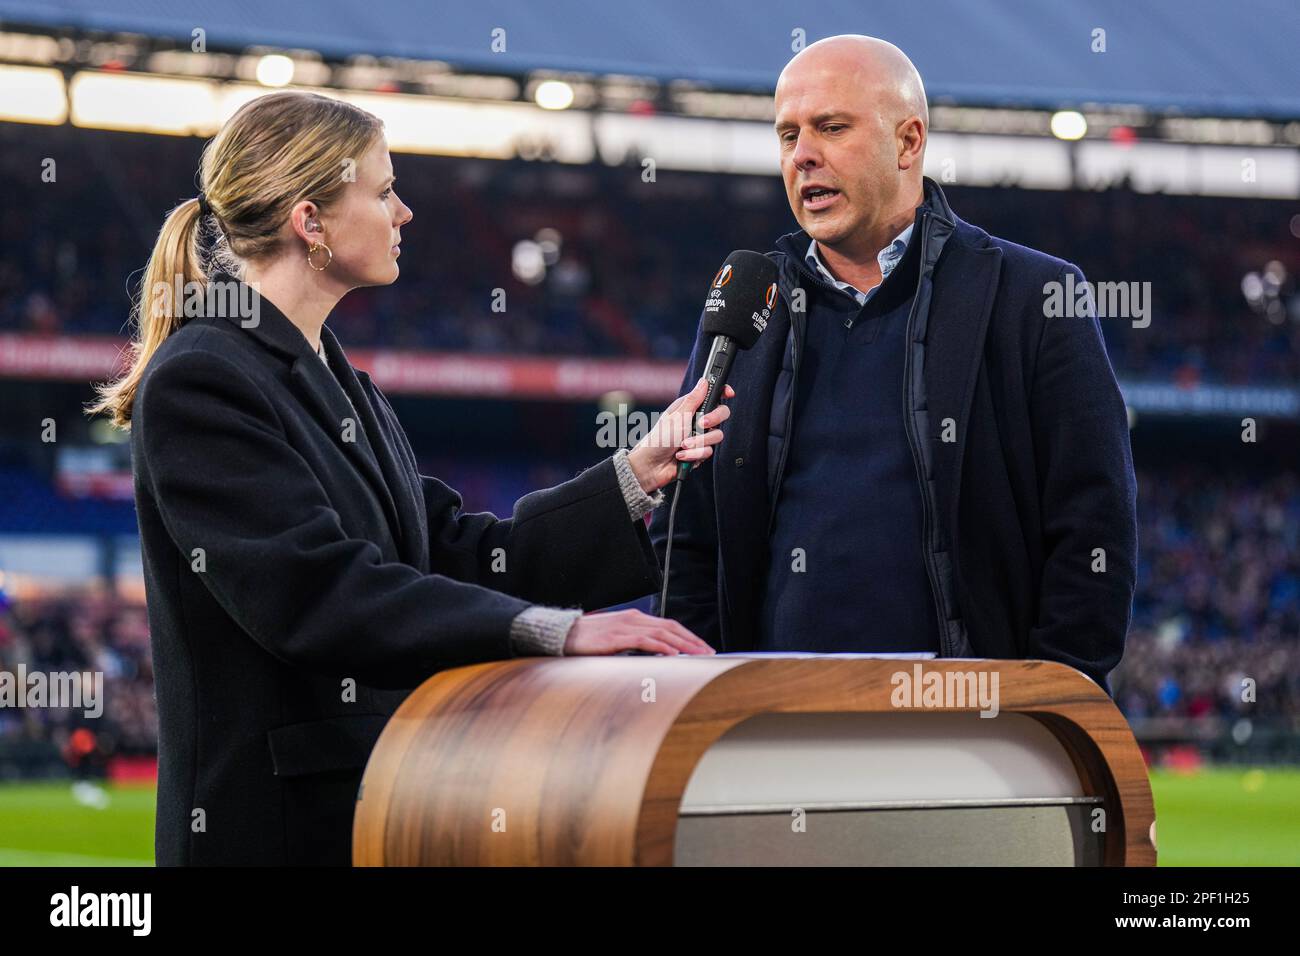 Rotterdam - Noa Vahle, Feyenoord coach Arne Slot during the match between Feyenoord v Shakhtar Donetsk at Stadion Feijenoord De Kuip on 16 March 2023 in Rotterdam, the Netherlands. (Box to Box Pictures/Yannick Verhoeven) Stock Photo